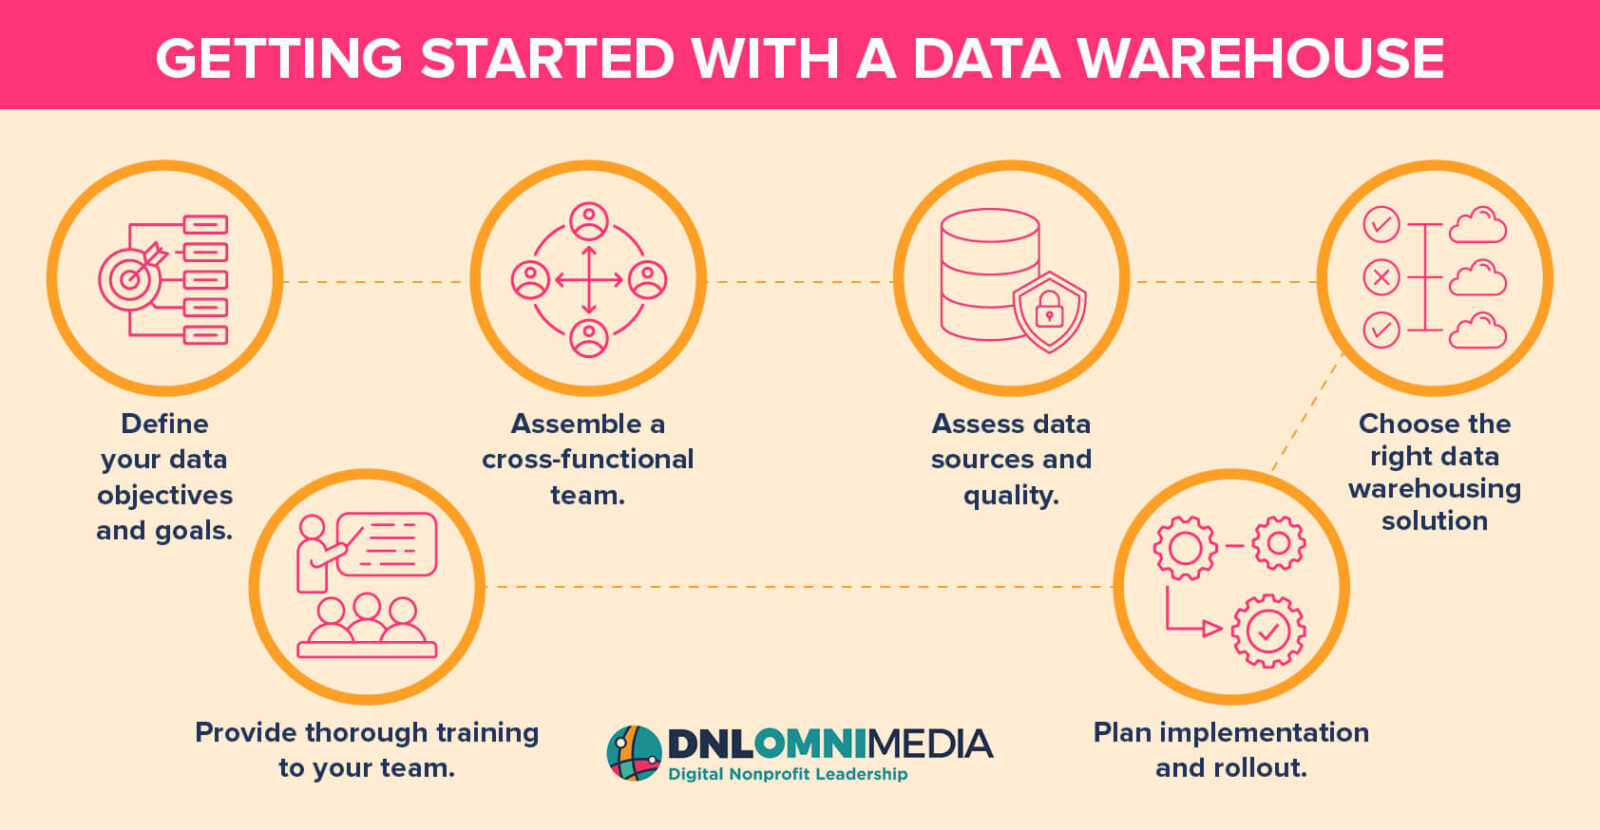 List of steps to getting started with a nonprofit data warehouse, which are outlined in the text below